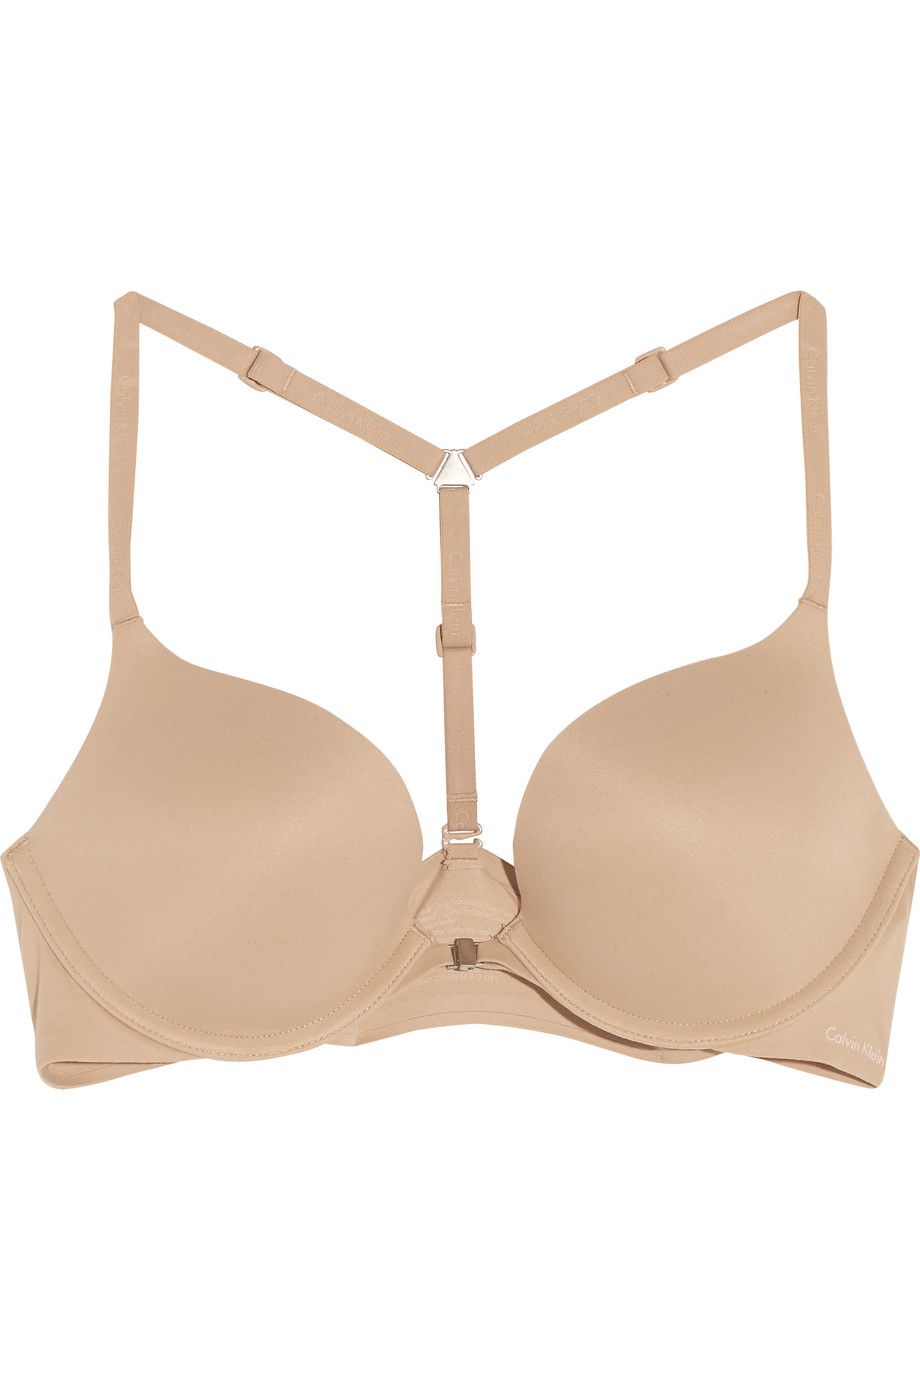 Calvin Klein Perfectly Fit Multi-Way Padded Bra